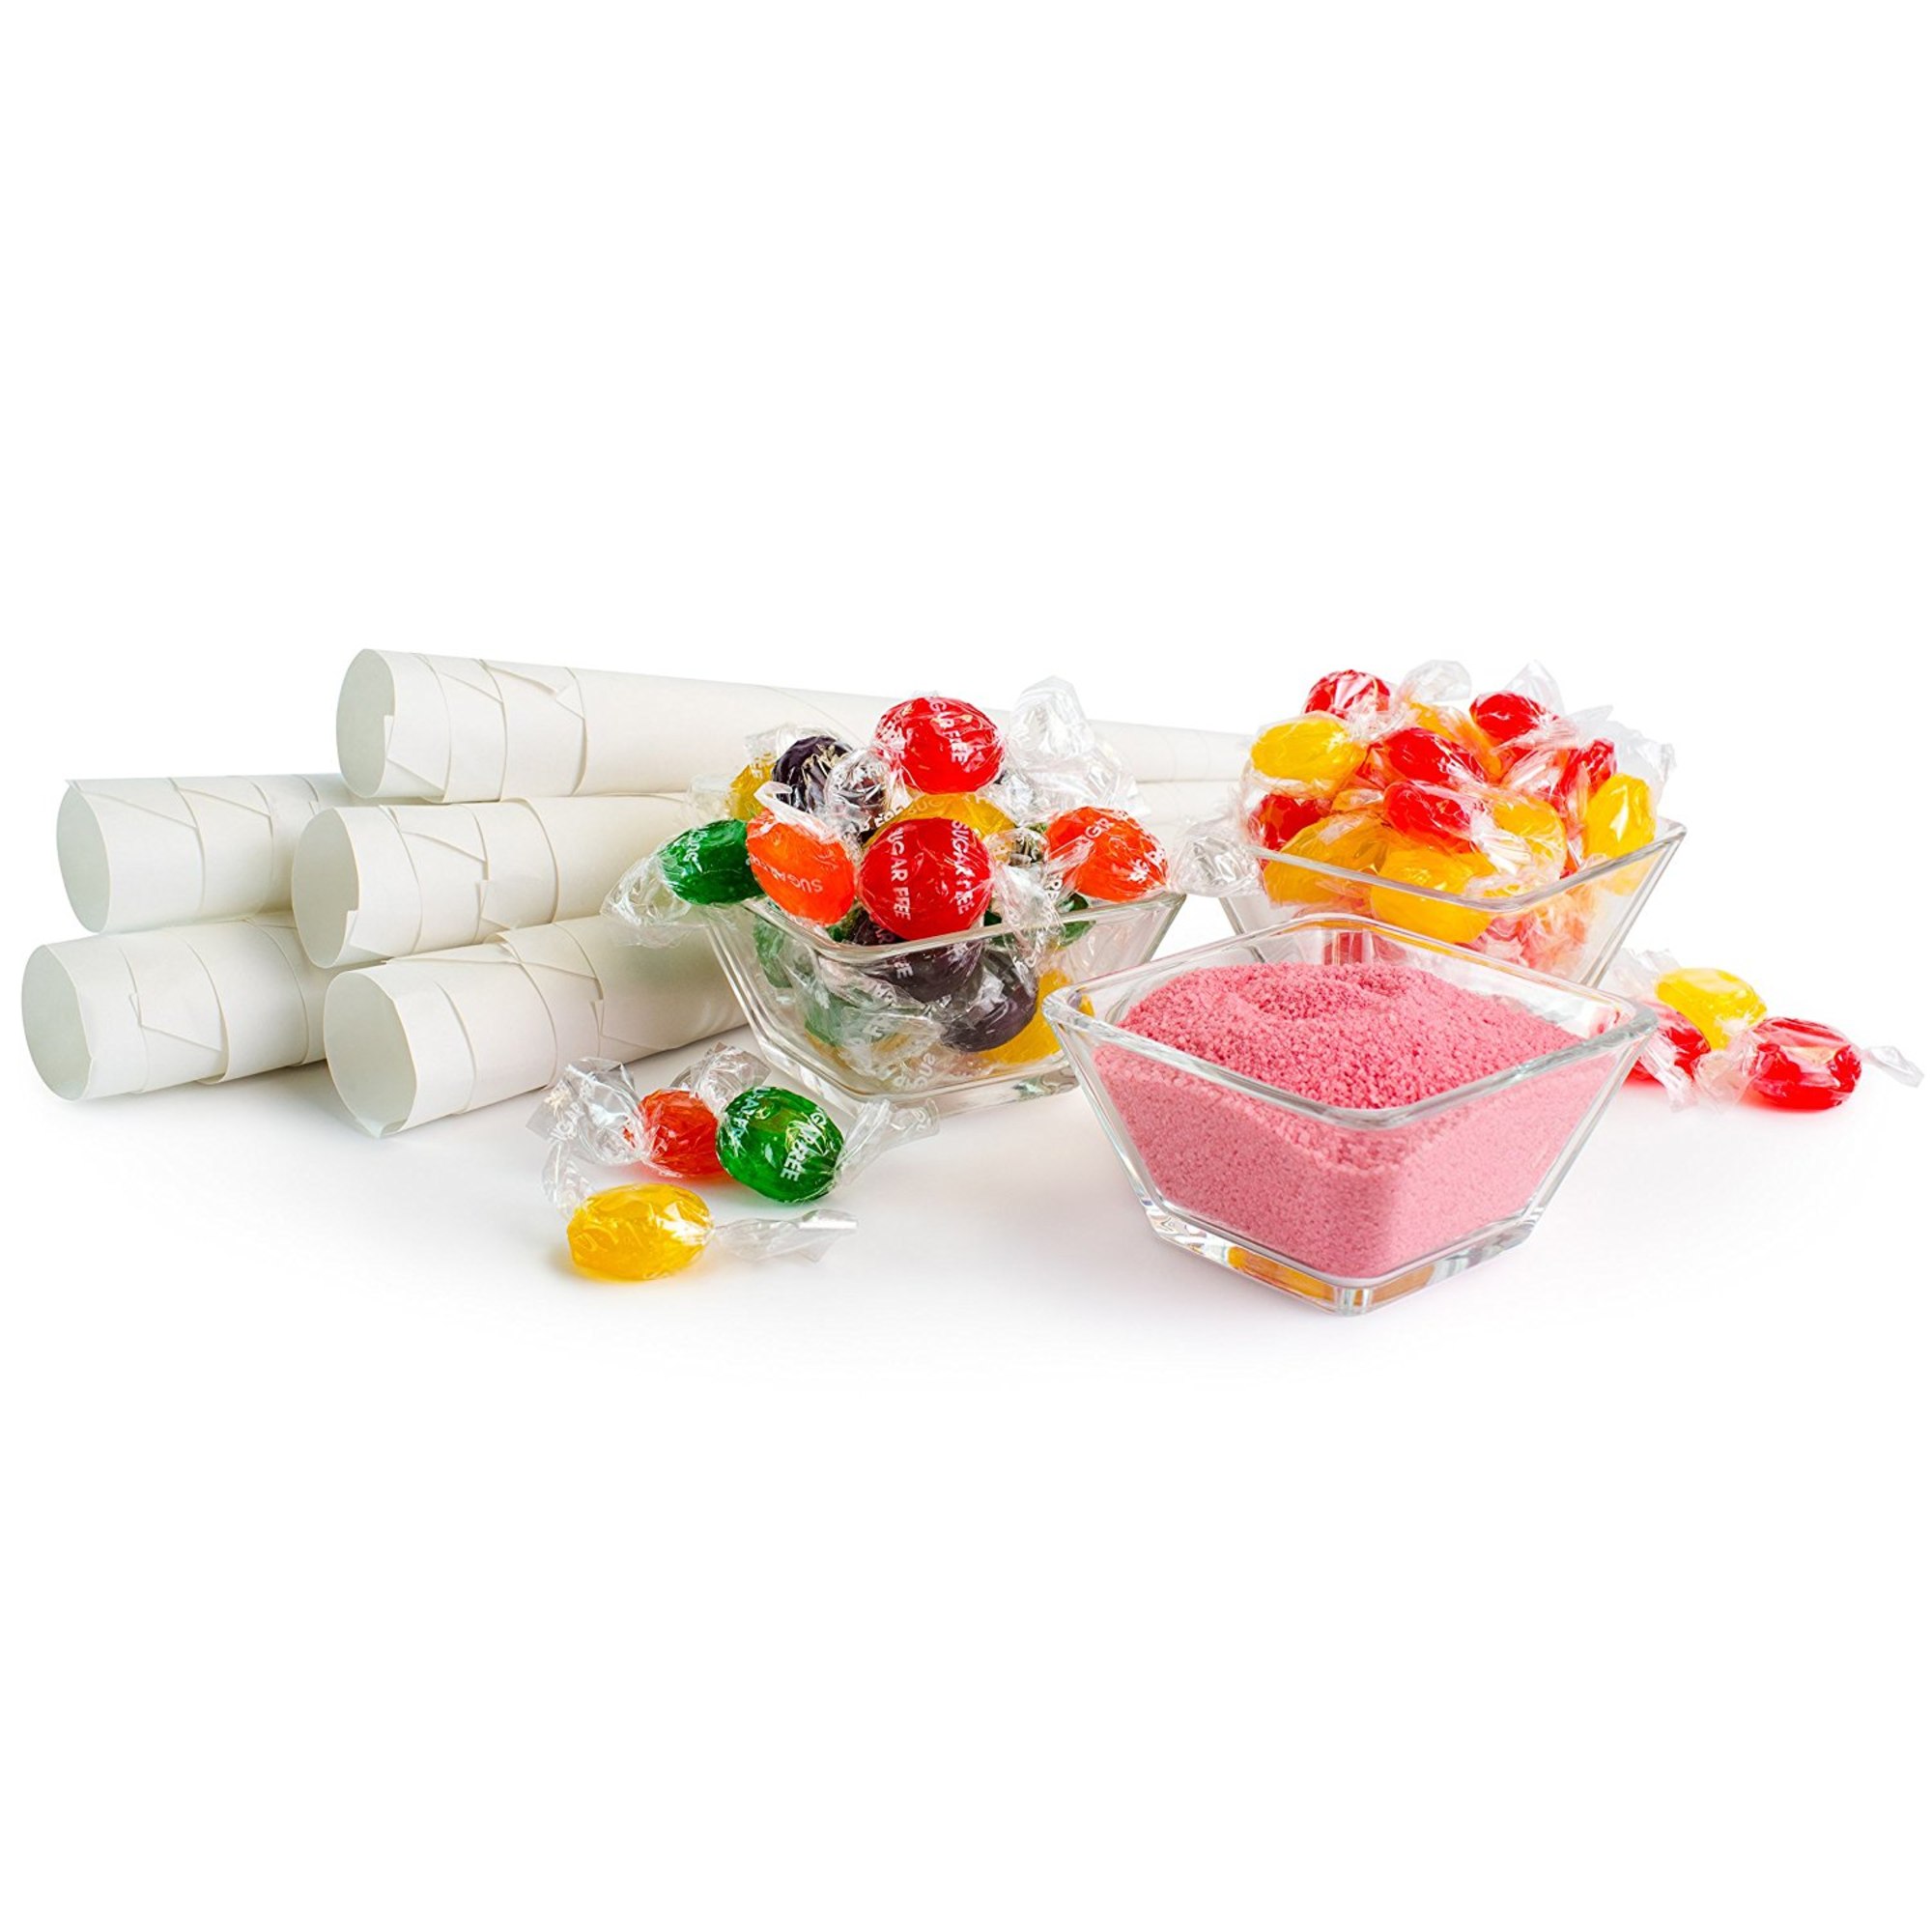 Nostalgia HCK800 Hard & Sugar-Free Candy Cotton Candy Party Kit, 60 Candies, Flossing Sugar, 24 Paper Cones - image 2 of 3